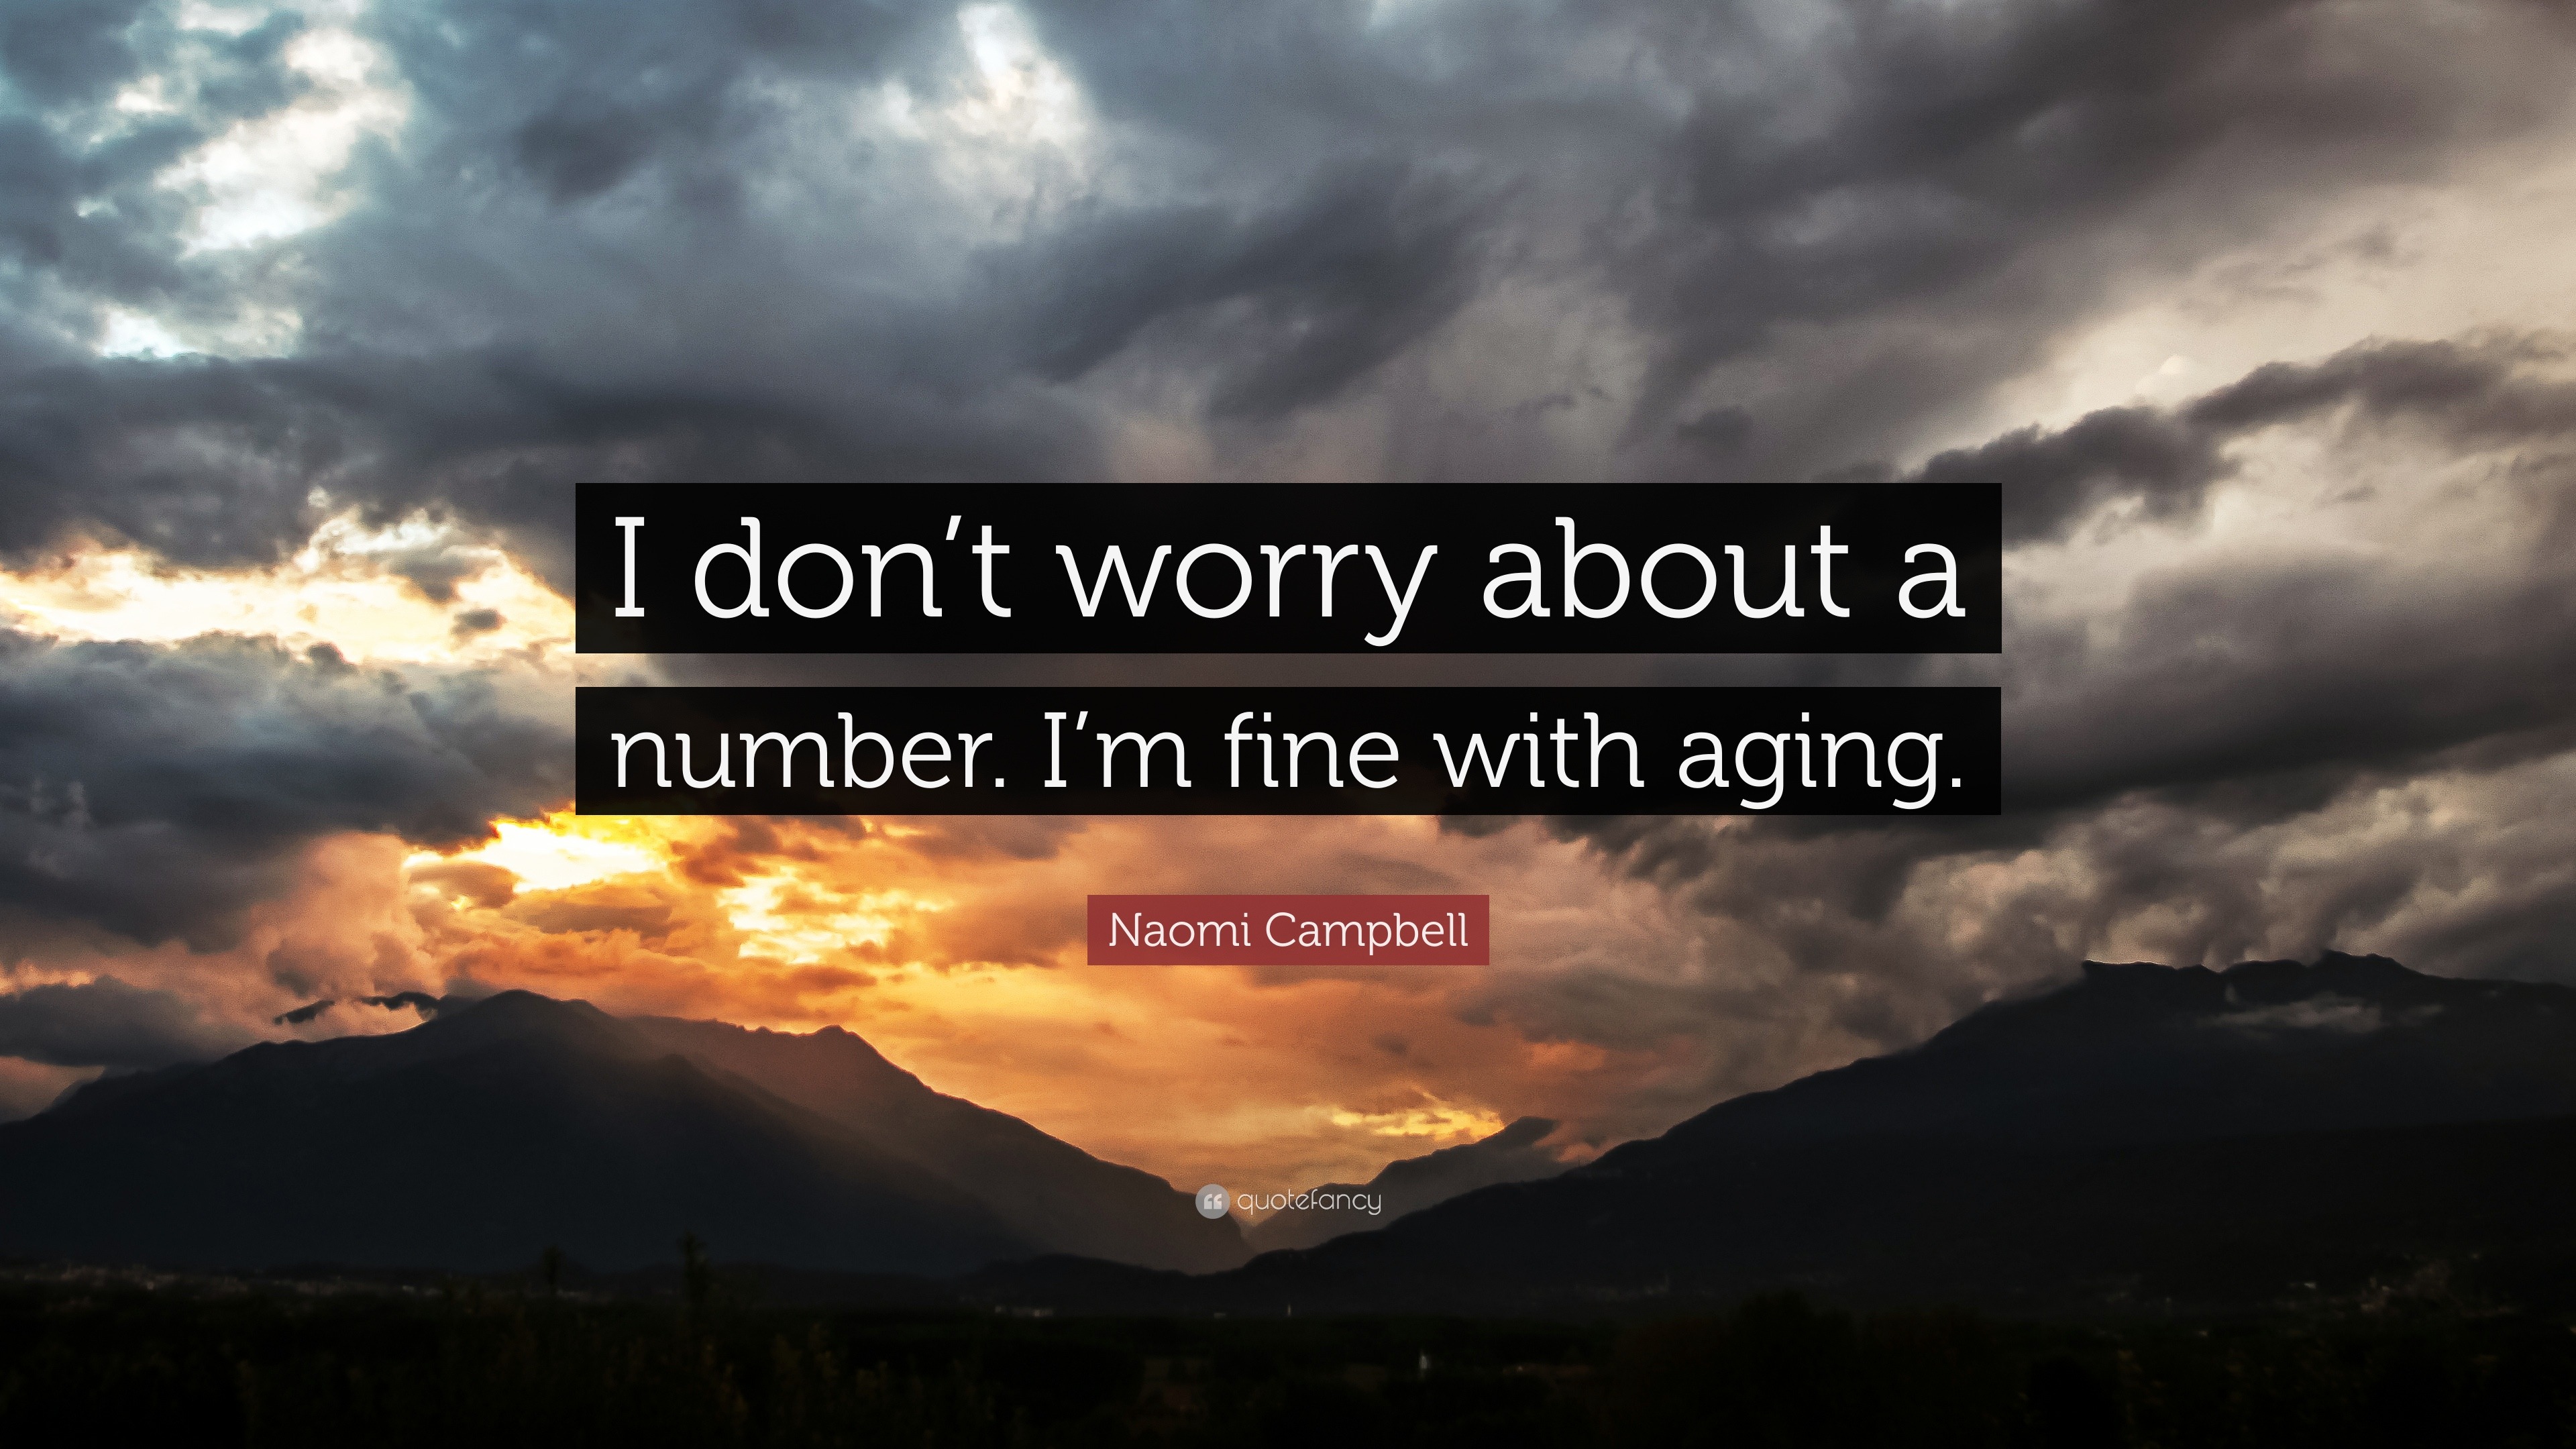 Naomi Campbell Quote: “I don't worry about a number. I'm fine with aging.”